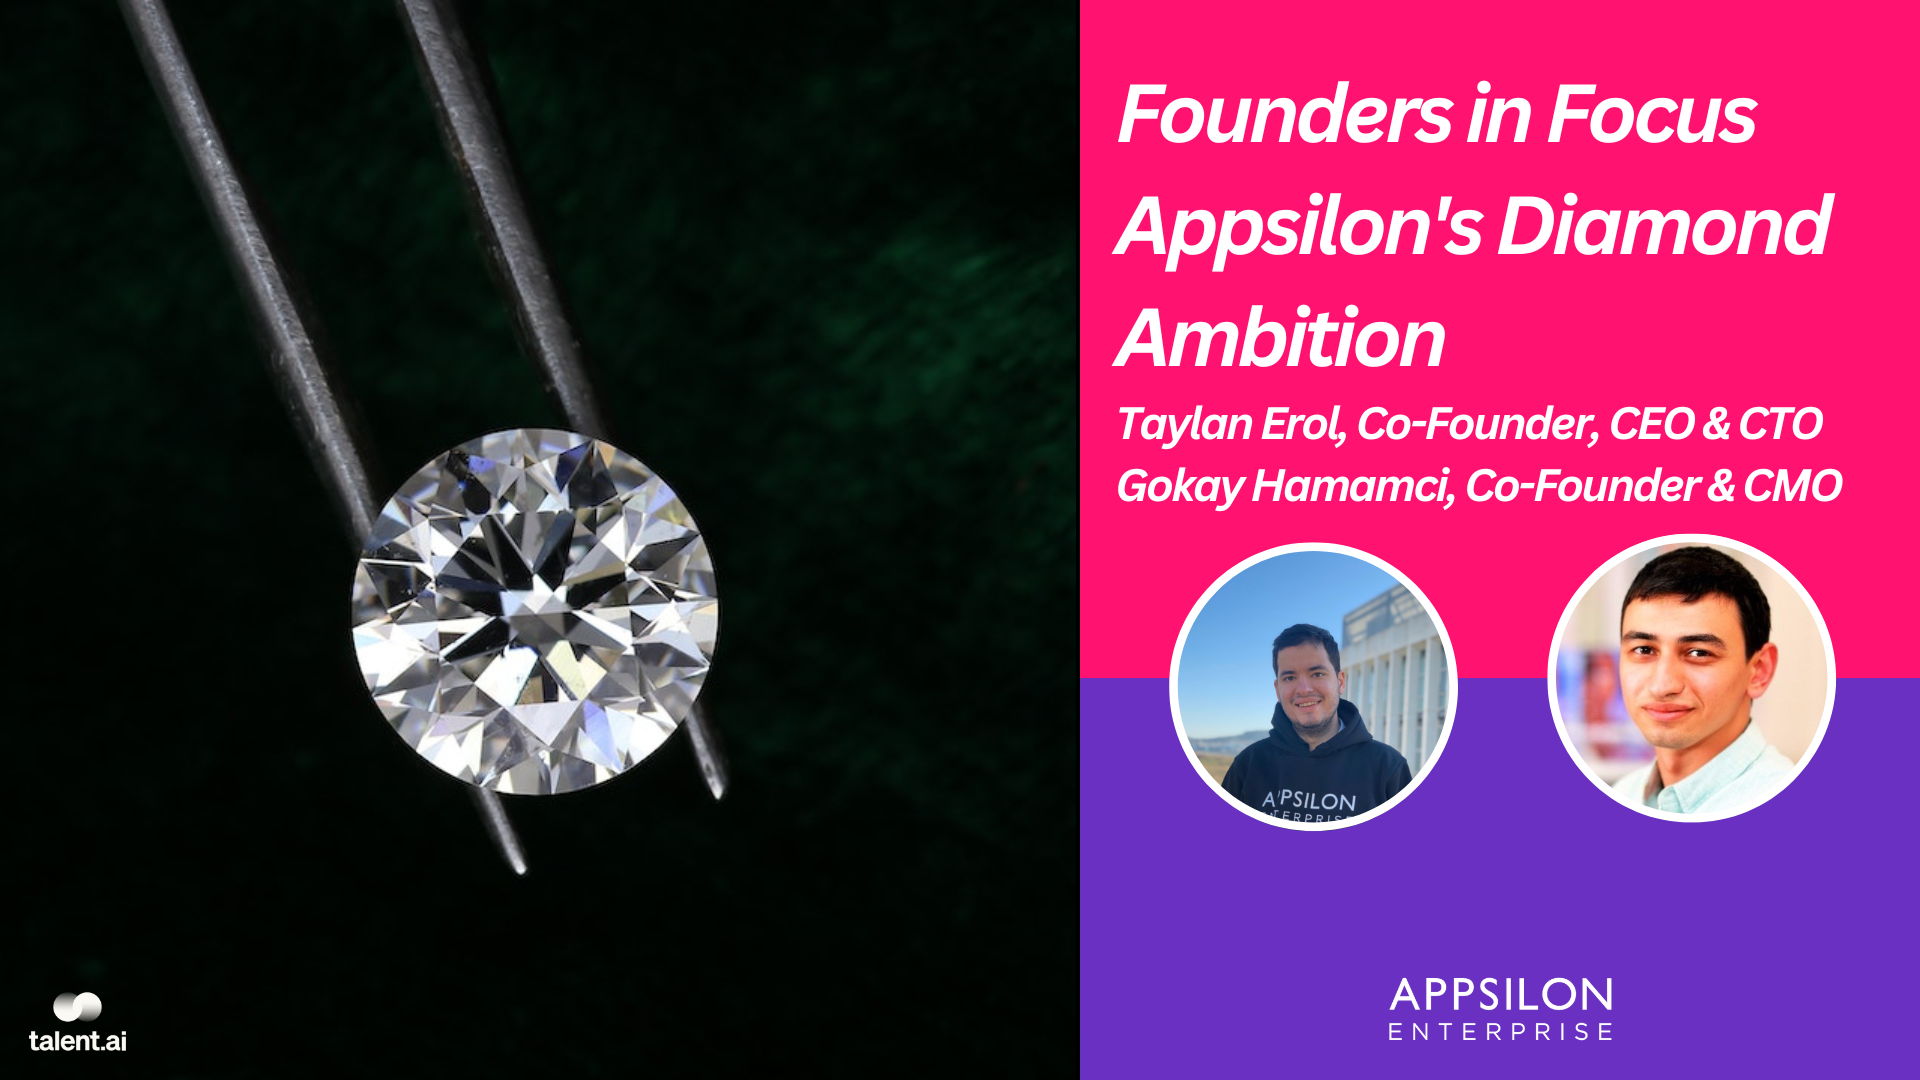 Appsilon founders on diamond creation, startups and the founders journey